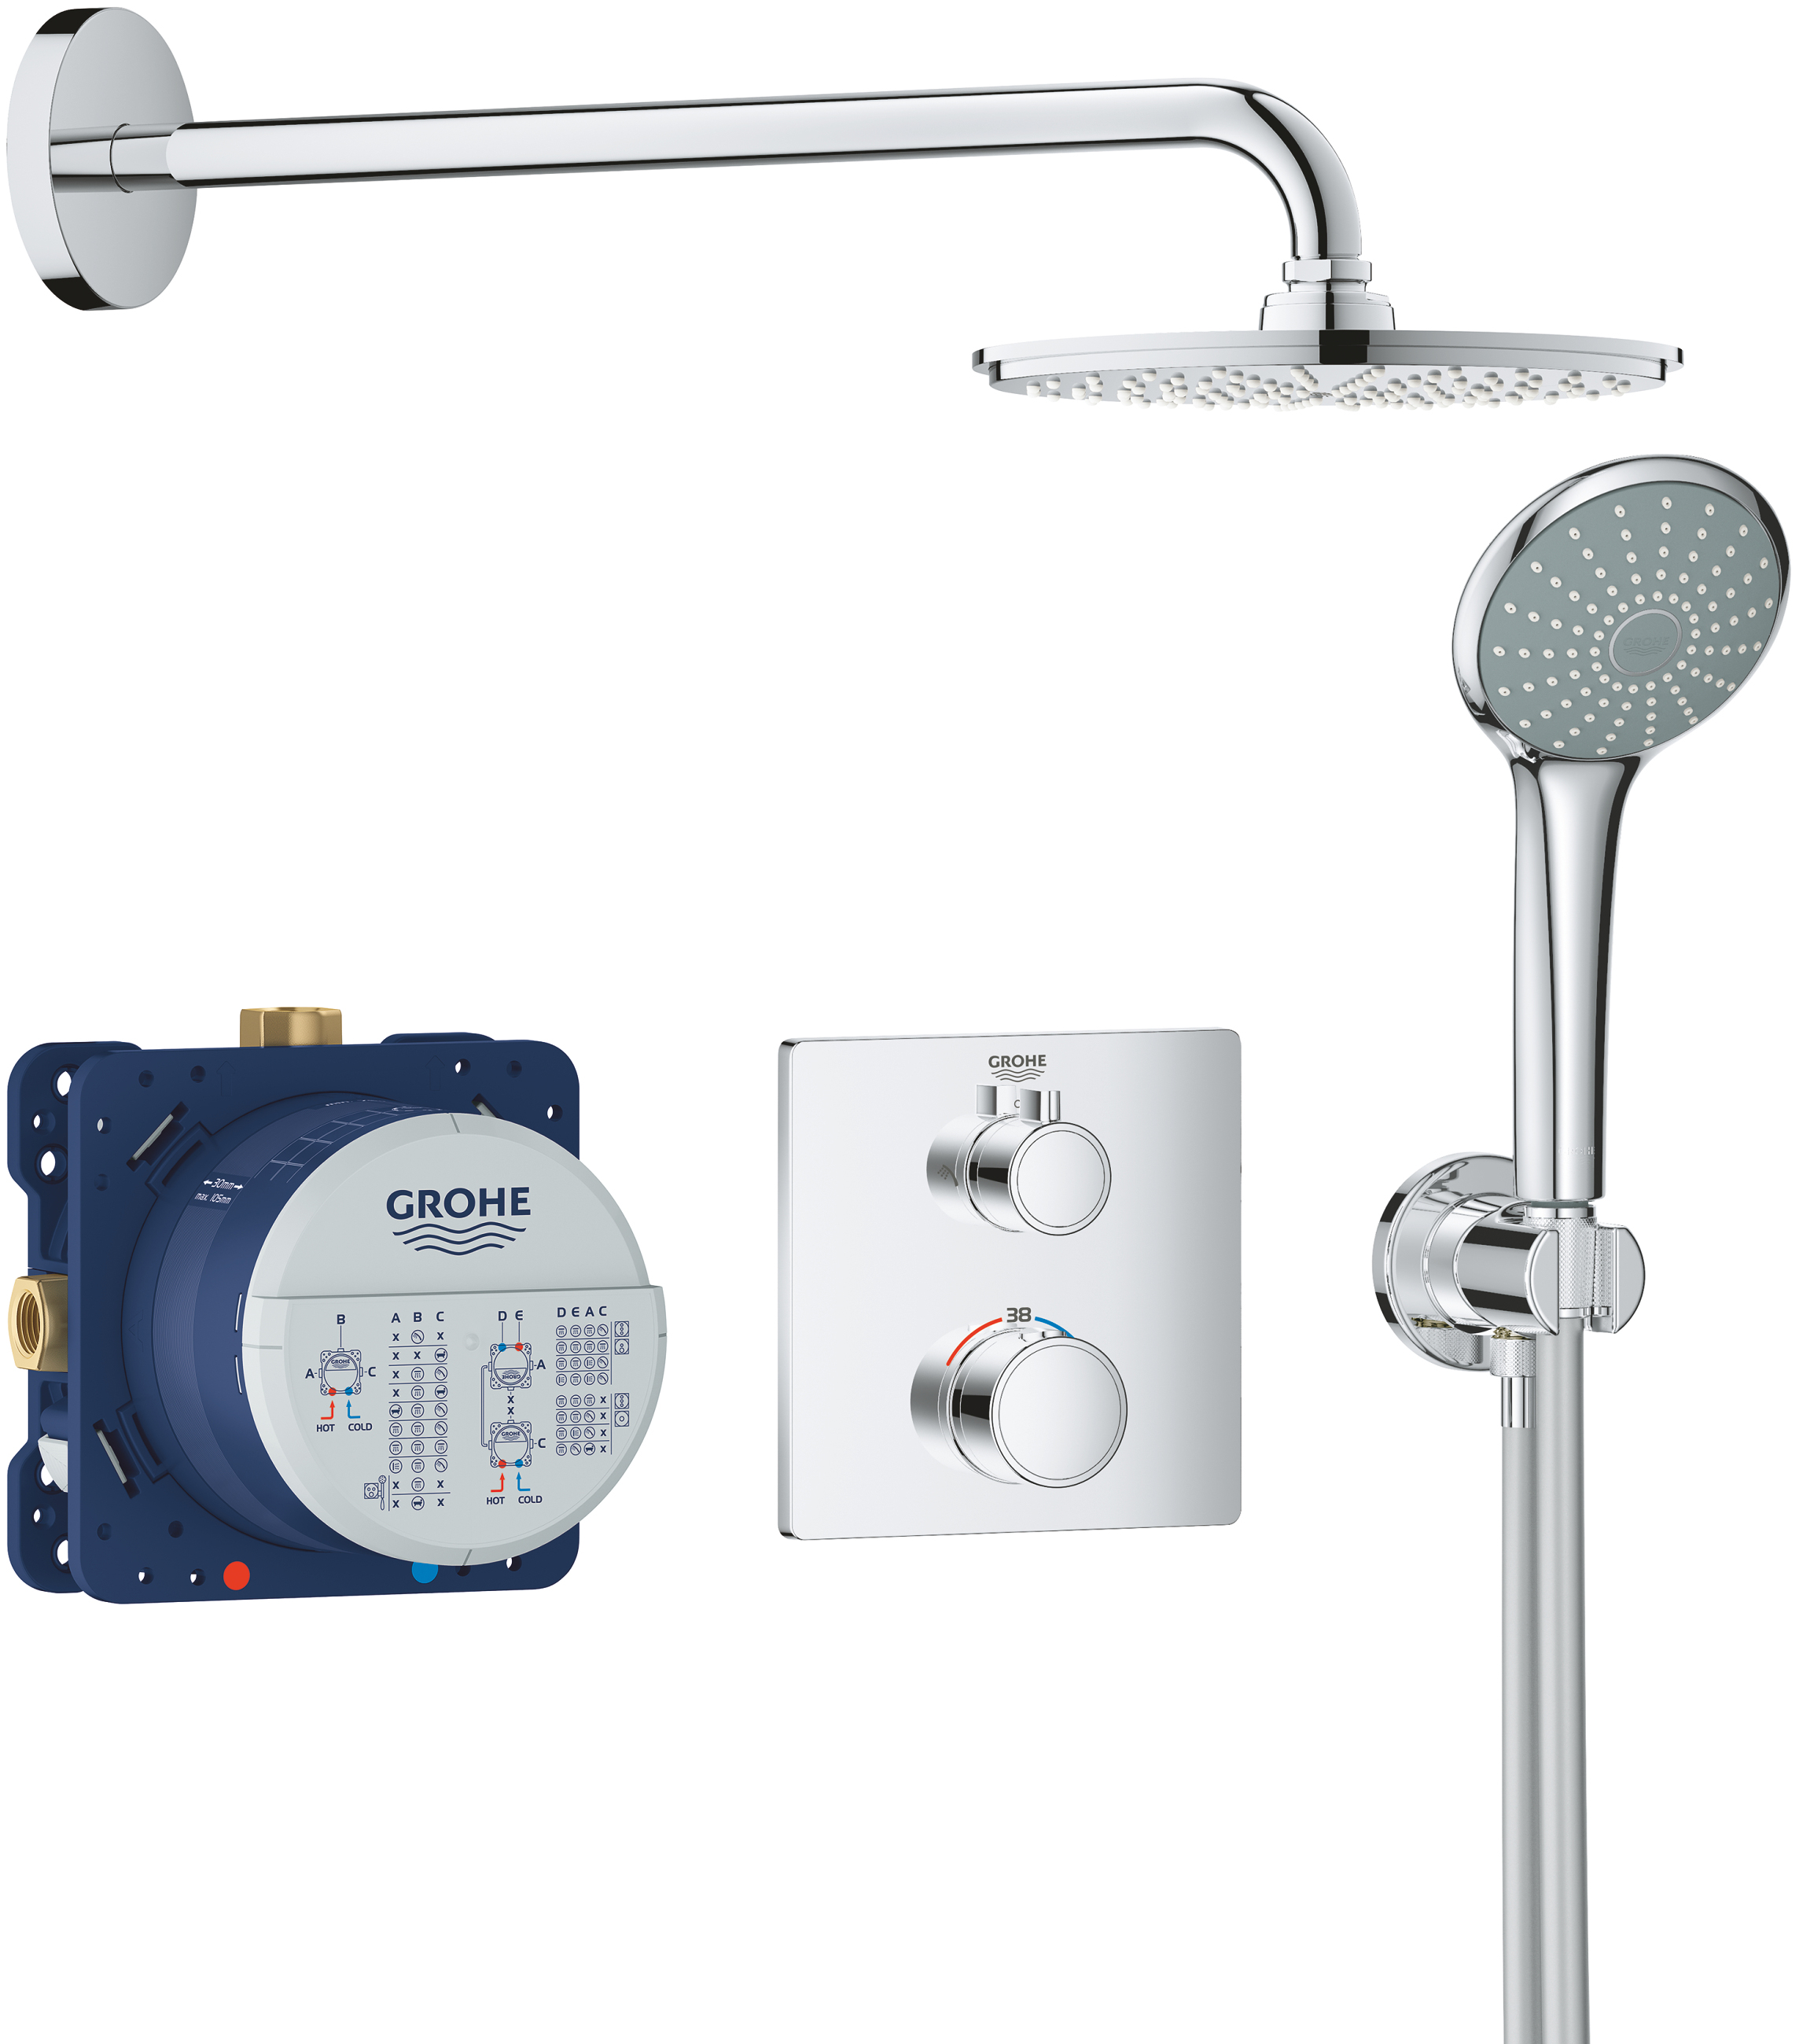 Душа grohe grohtherm. Grohe Grohtherm SMARTCONTROL 34744000. Grohe Grohtherm 34727000. Grohe Grohtherm SMARTCONTROL. 34741000 Grohe.